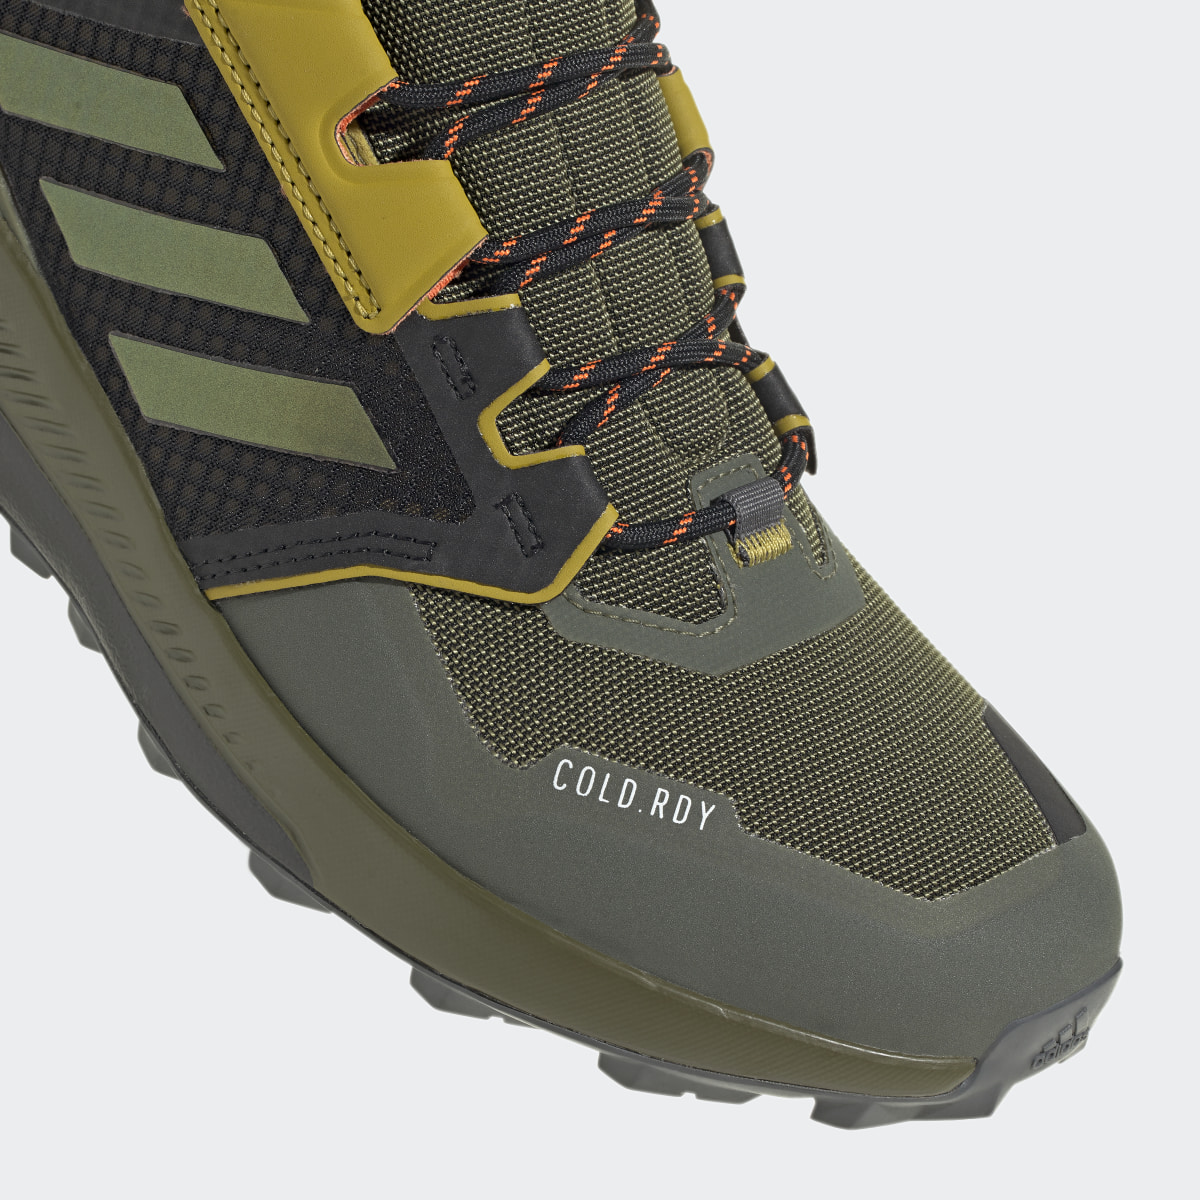 Adidas Terrex Trailmaker Mid COLD.RDY Hiking Boots. 10